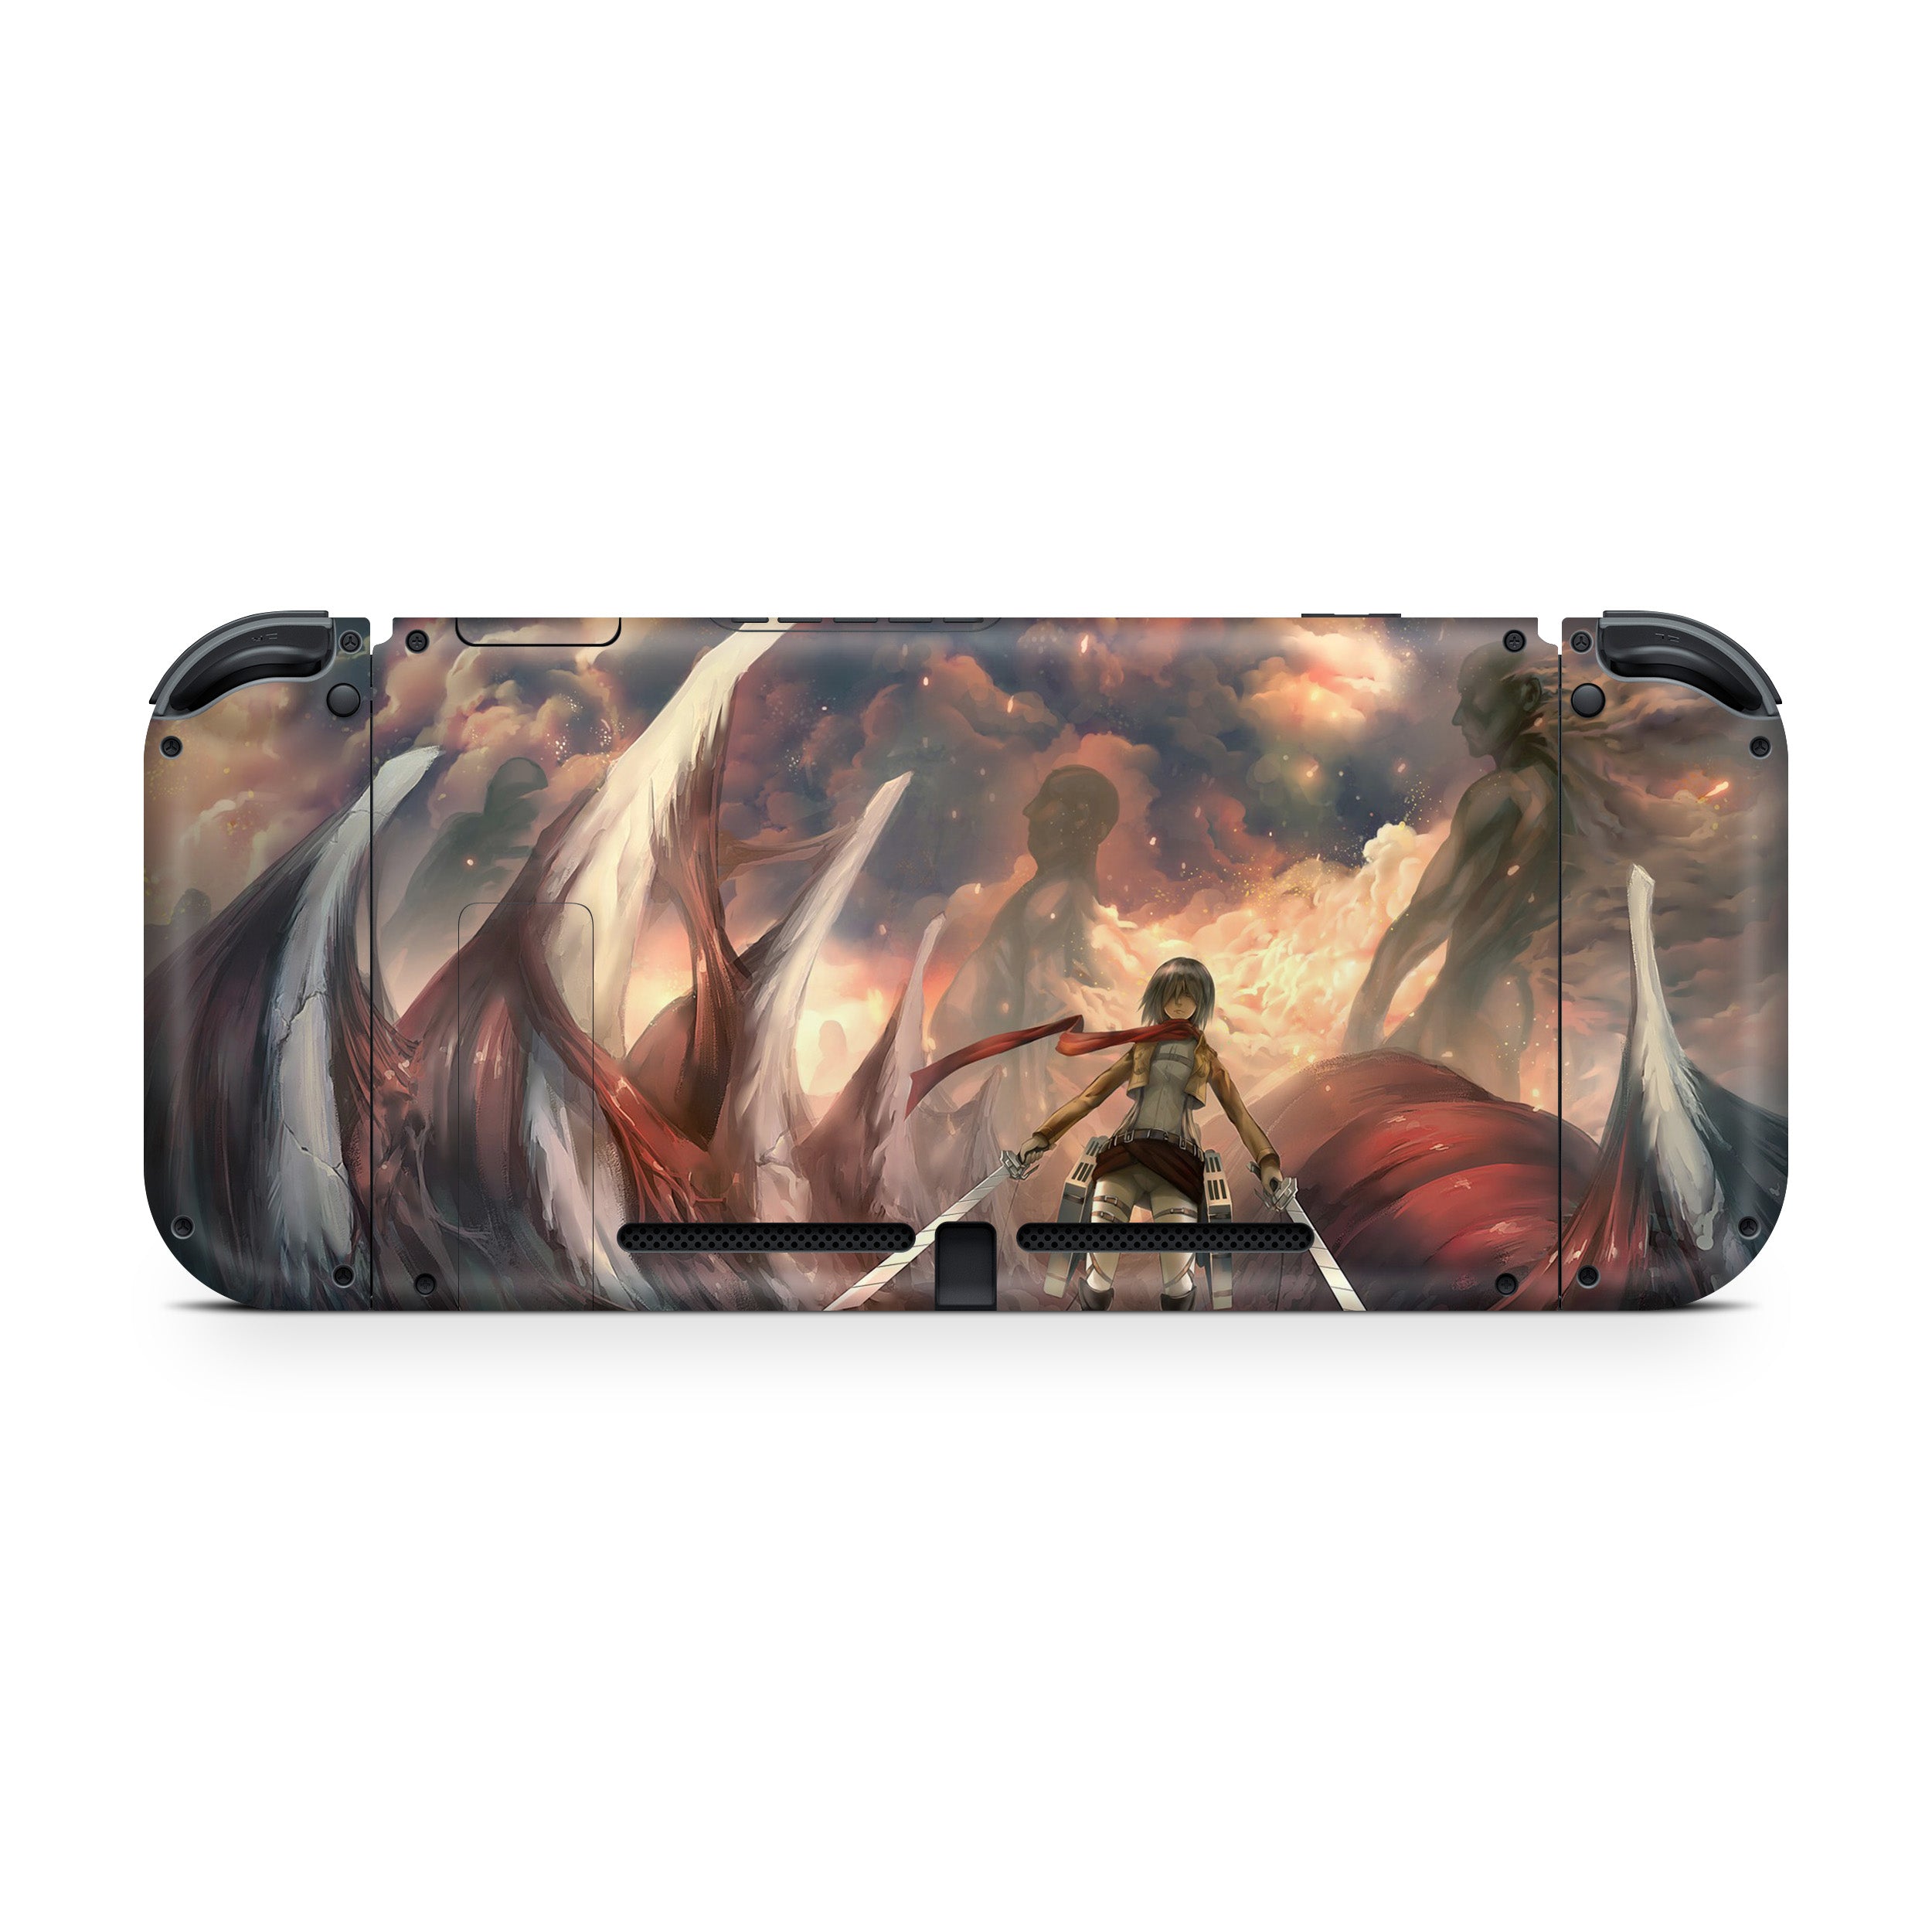 A video game skin featuring a Attack On Titan Mikasa Ackerman design for the Nintendo Switch.